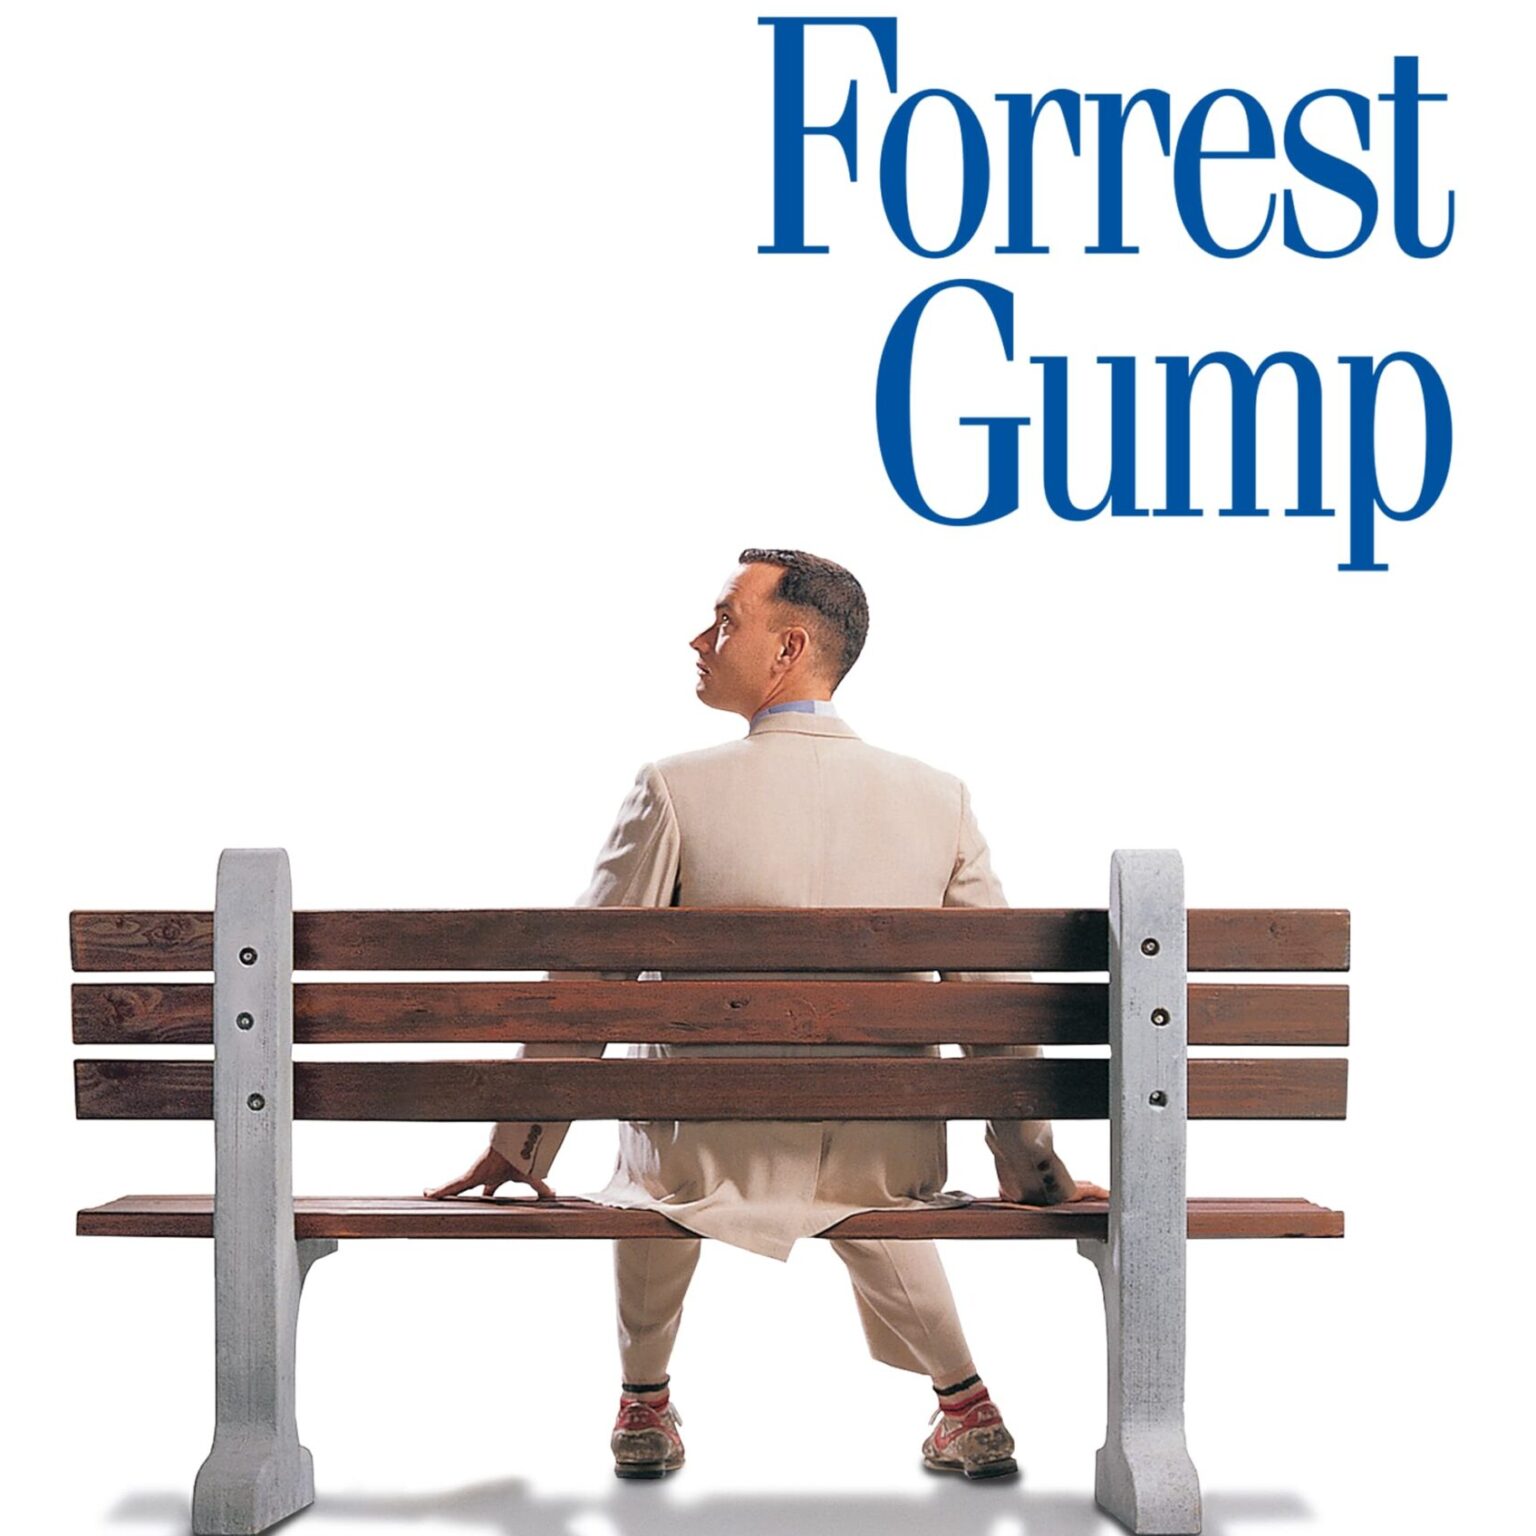 Forrest Gump Opening Song